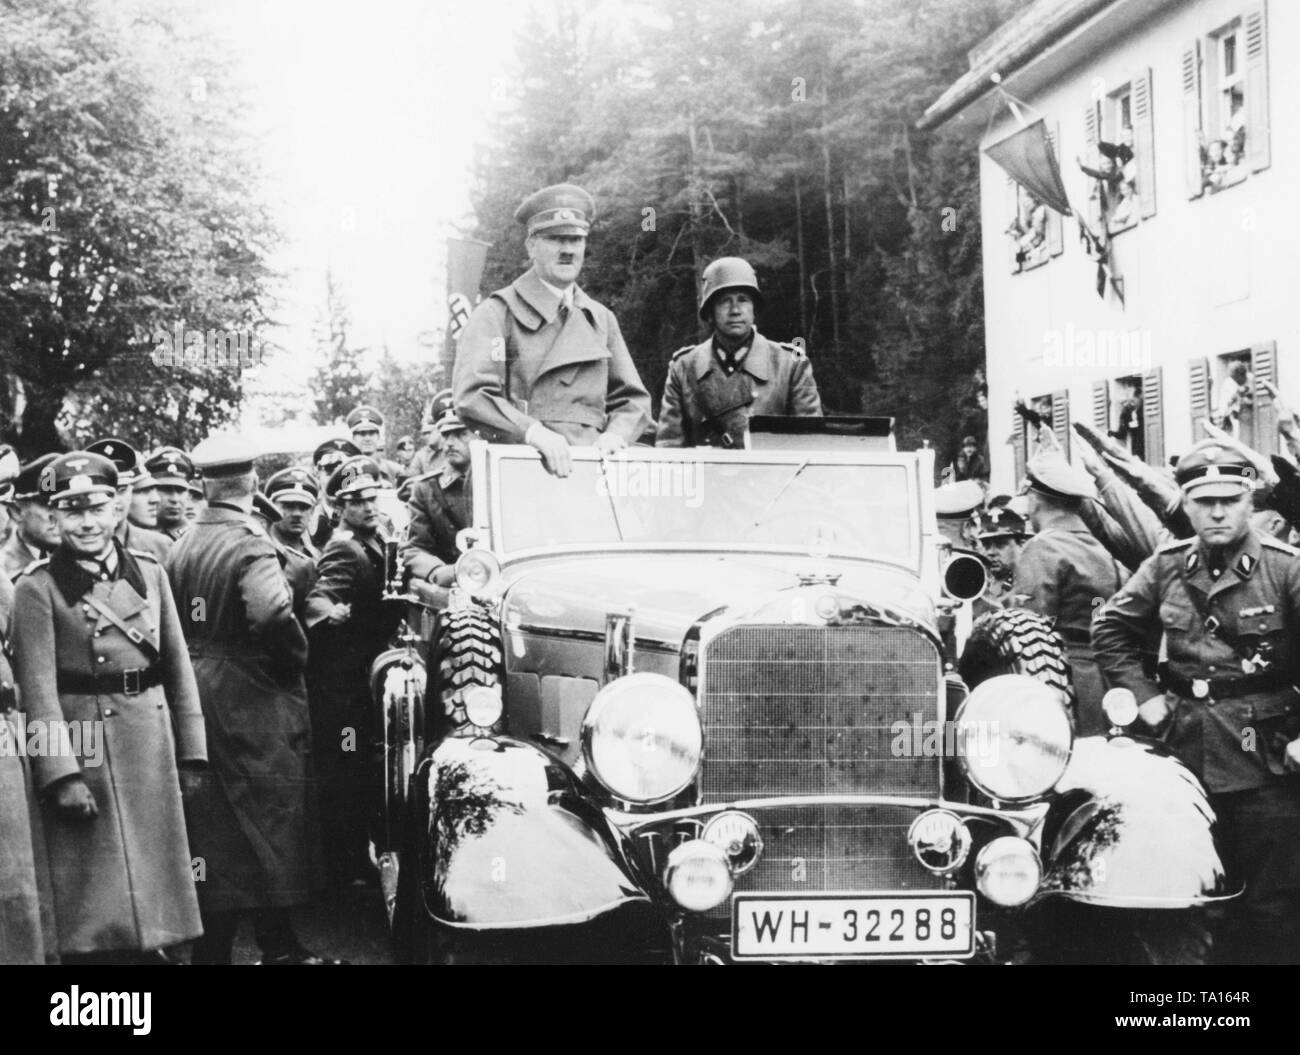 Adolf Hitler entering a city in the occupied Sudetenland. Hitler's motorcade is received by the cheering population. They are greeting him with the Nazi salute. With Hitler in the car, General Walter von Reichenau. On the left side of the road, General of the Armored Corps Heinz Guderian. Stock Photo